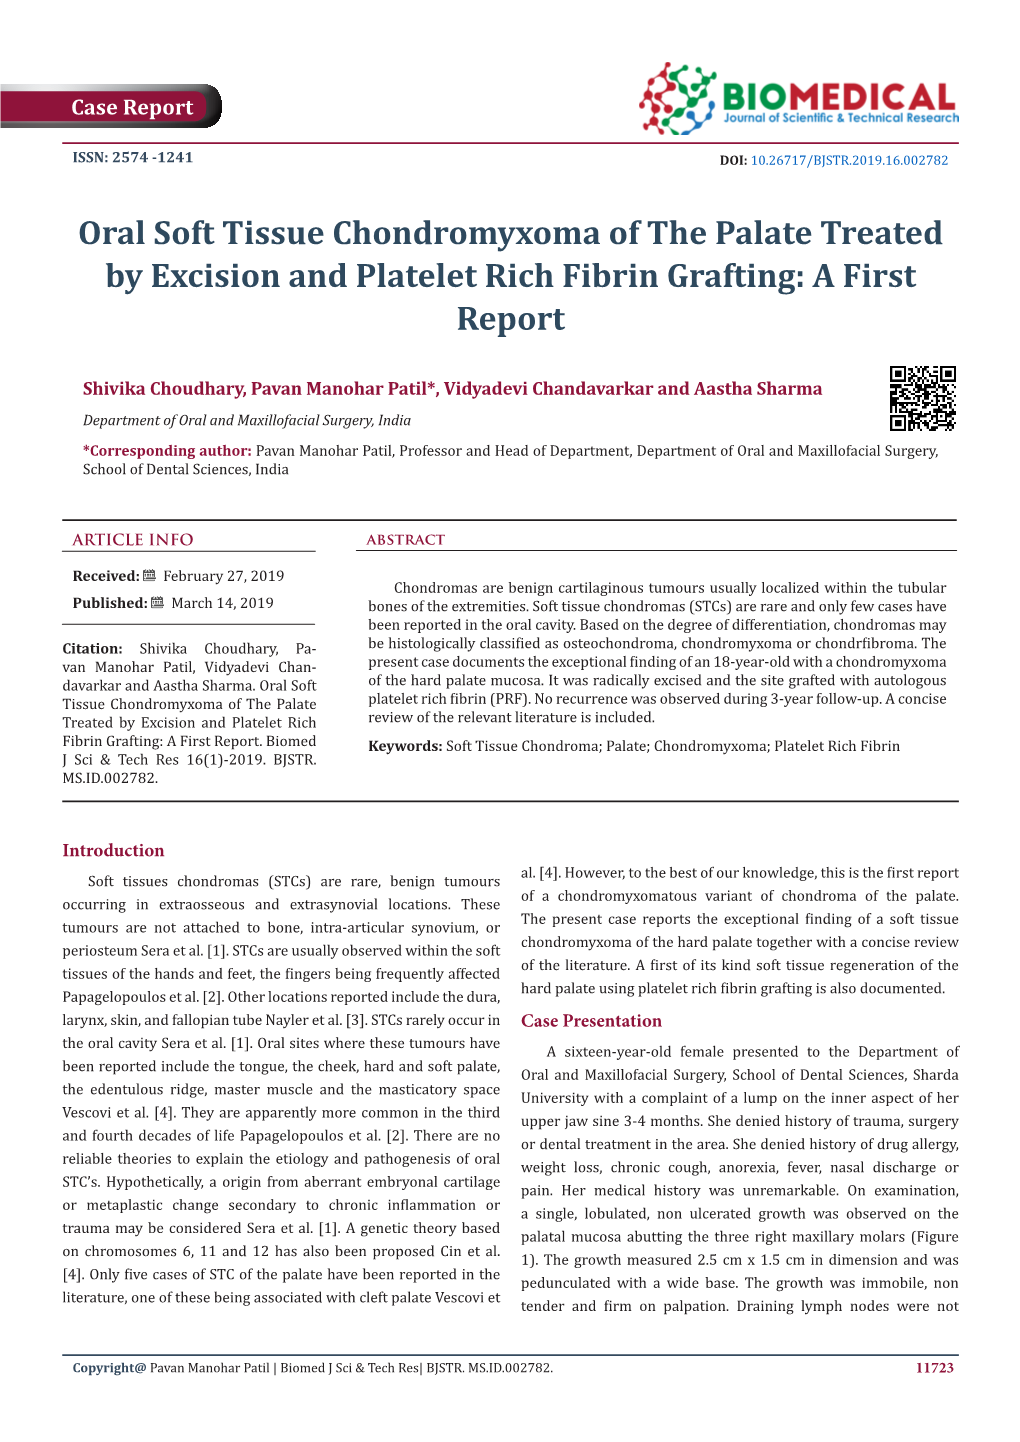 Oral Soft Tissue Chondromyxoma of the Palate Treated by Excision and Platelet Rich Fibrin Grafting: a First Report